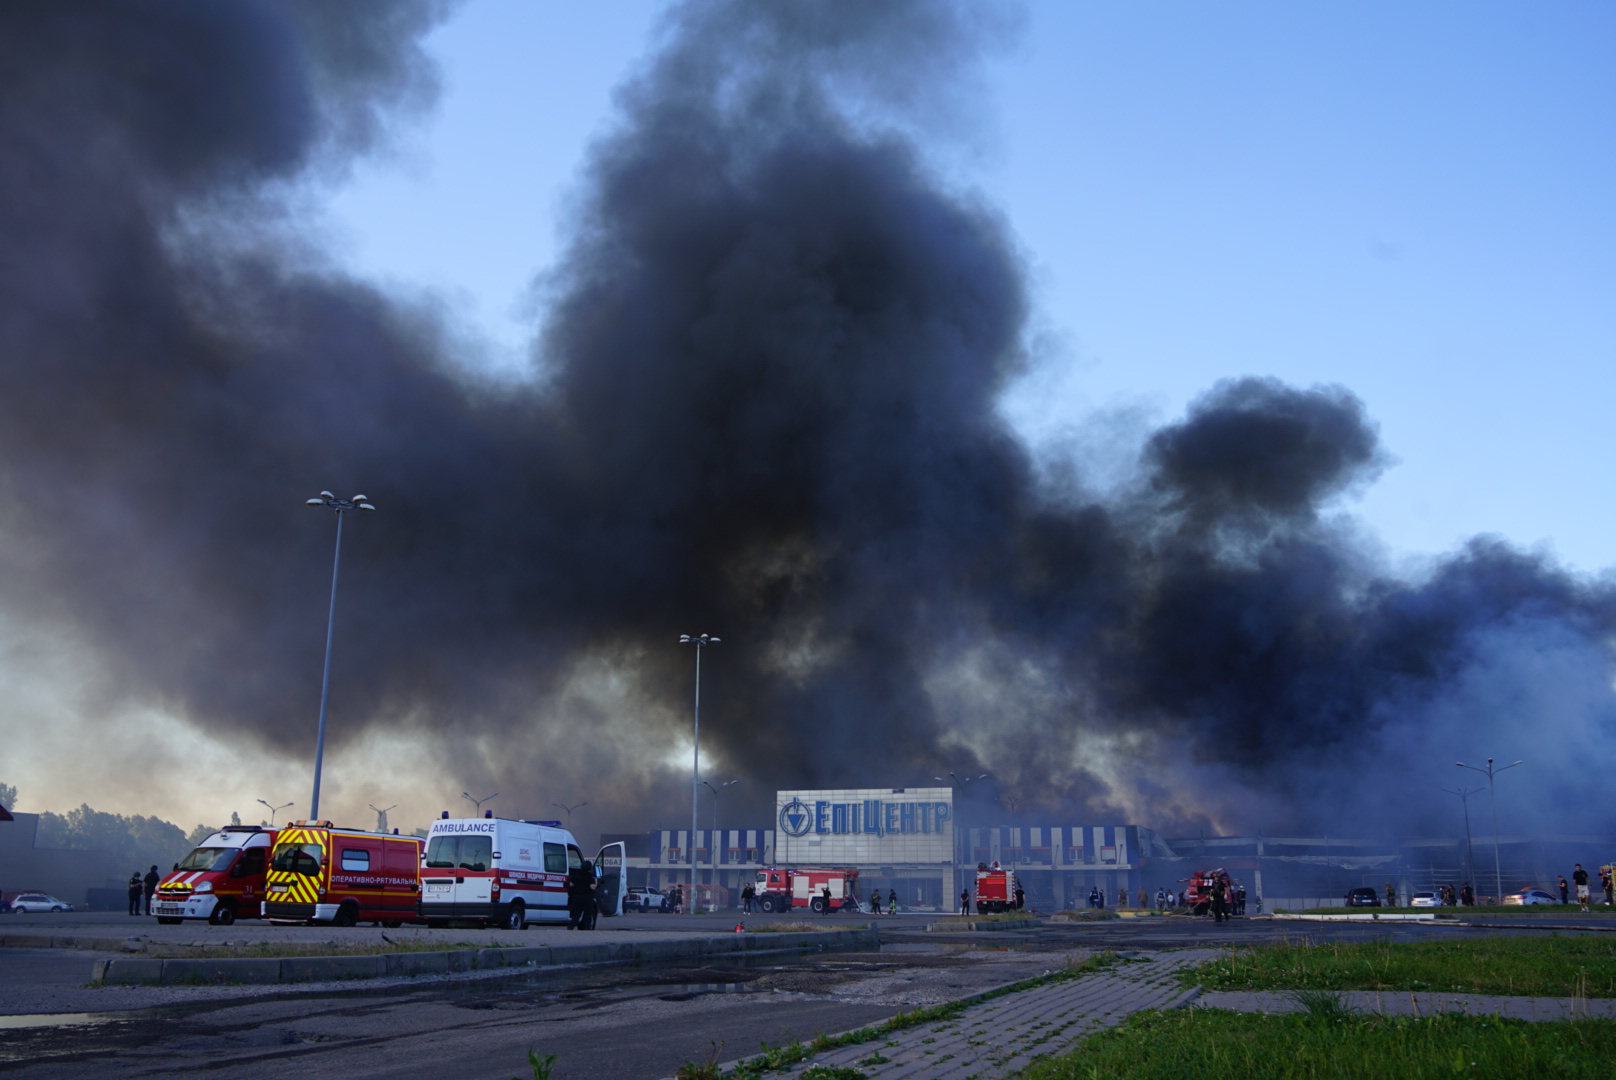 Burning hypermarket in Kharkiv's residential district in the aftermath of Russian glide bomb attack on May 25 / Photo: Denys Klymenko, Gwara Media